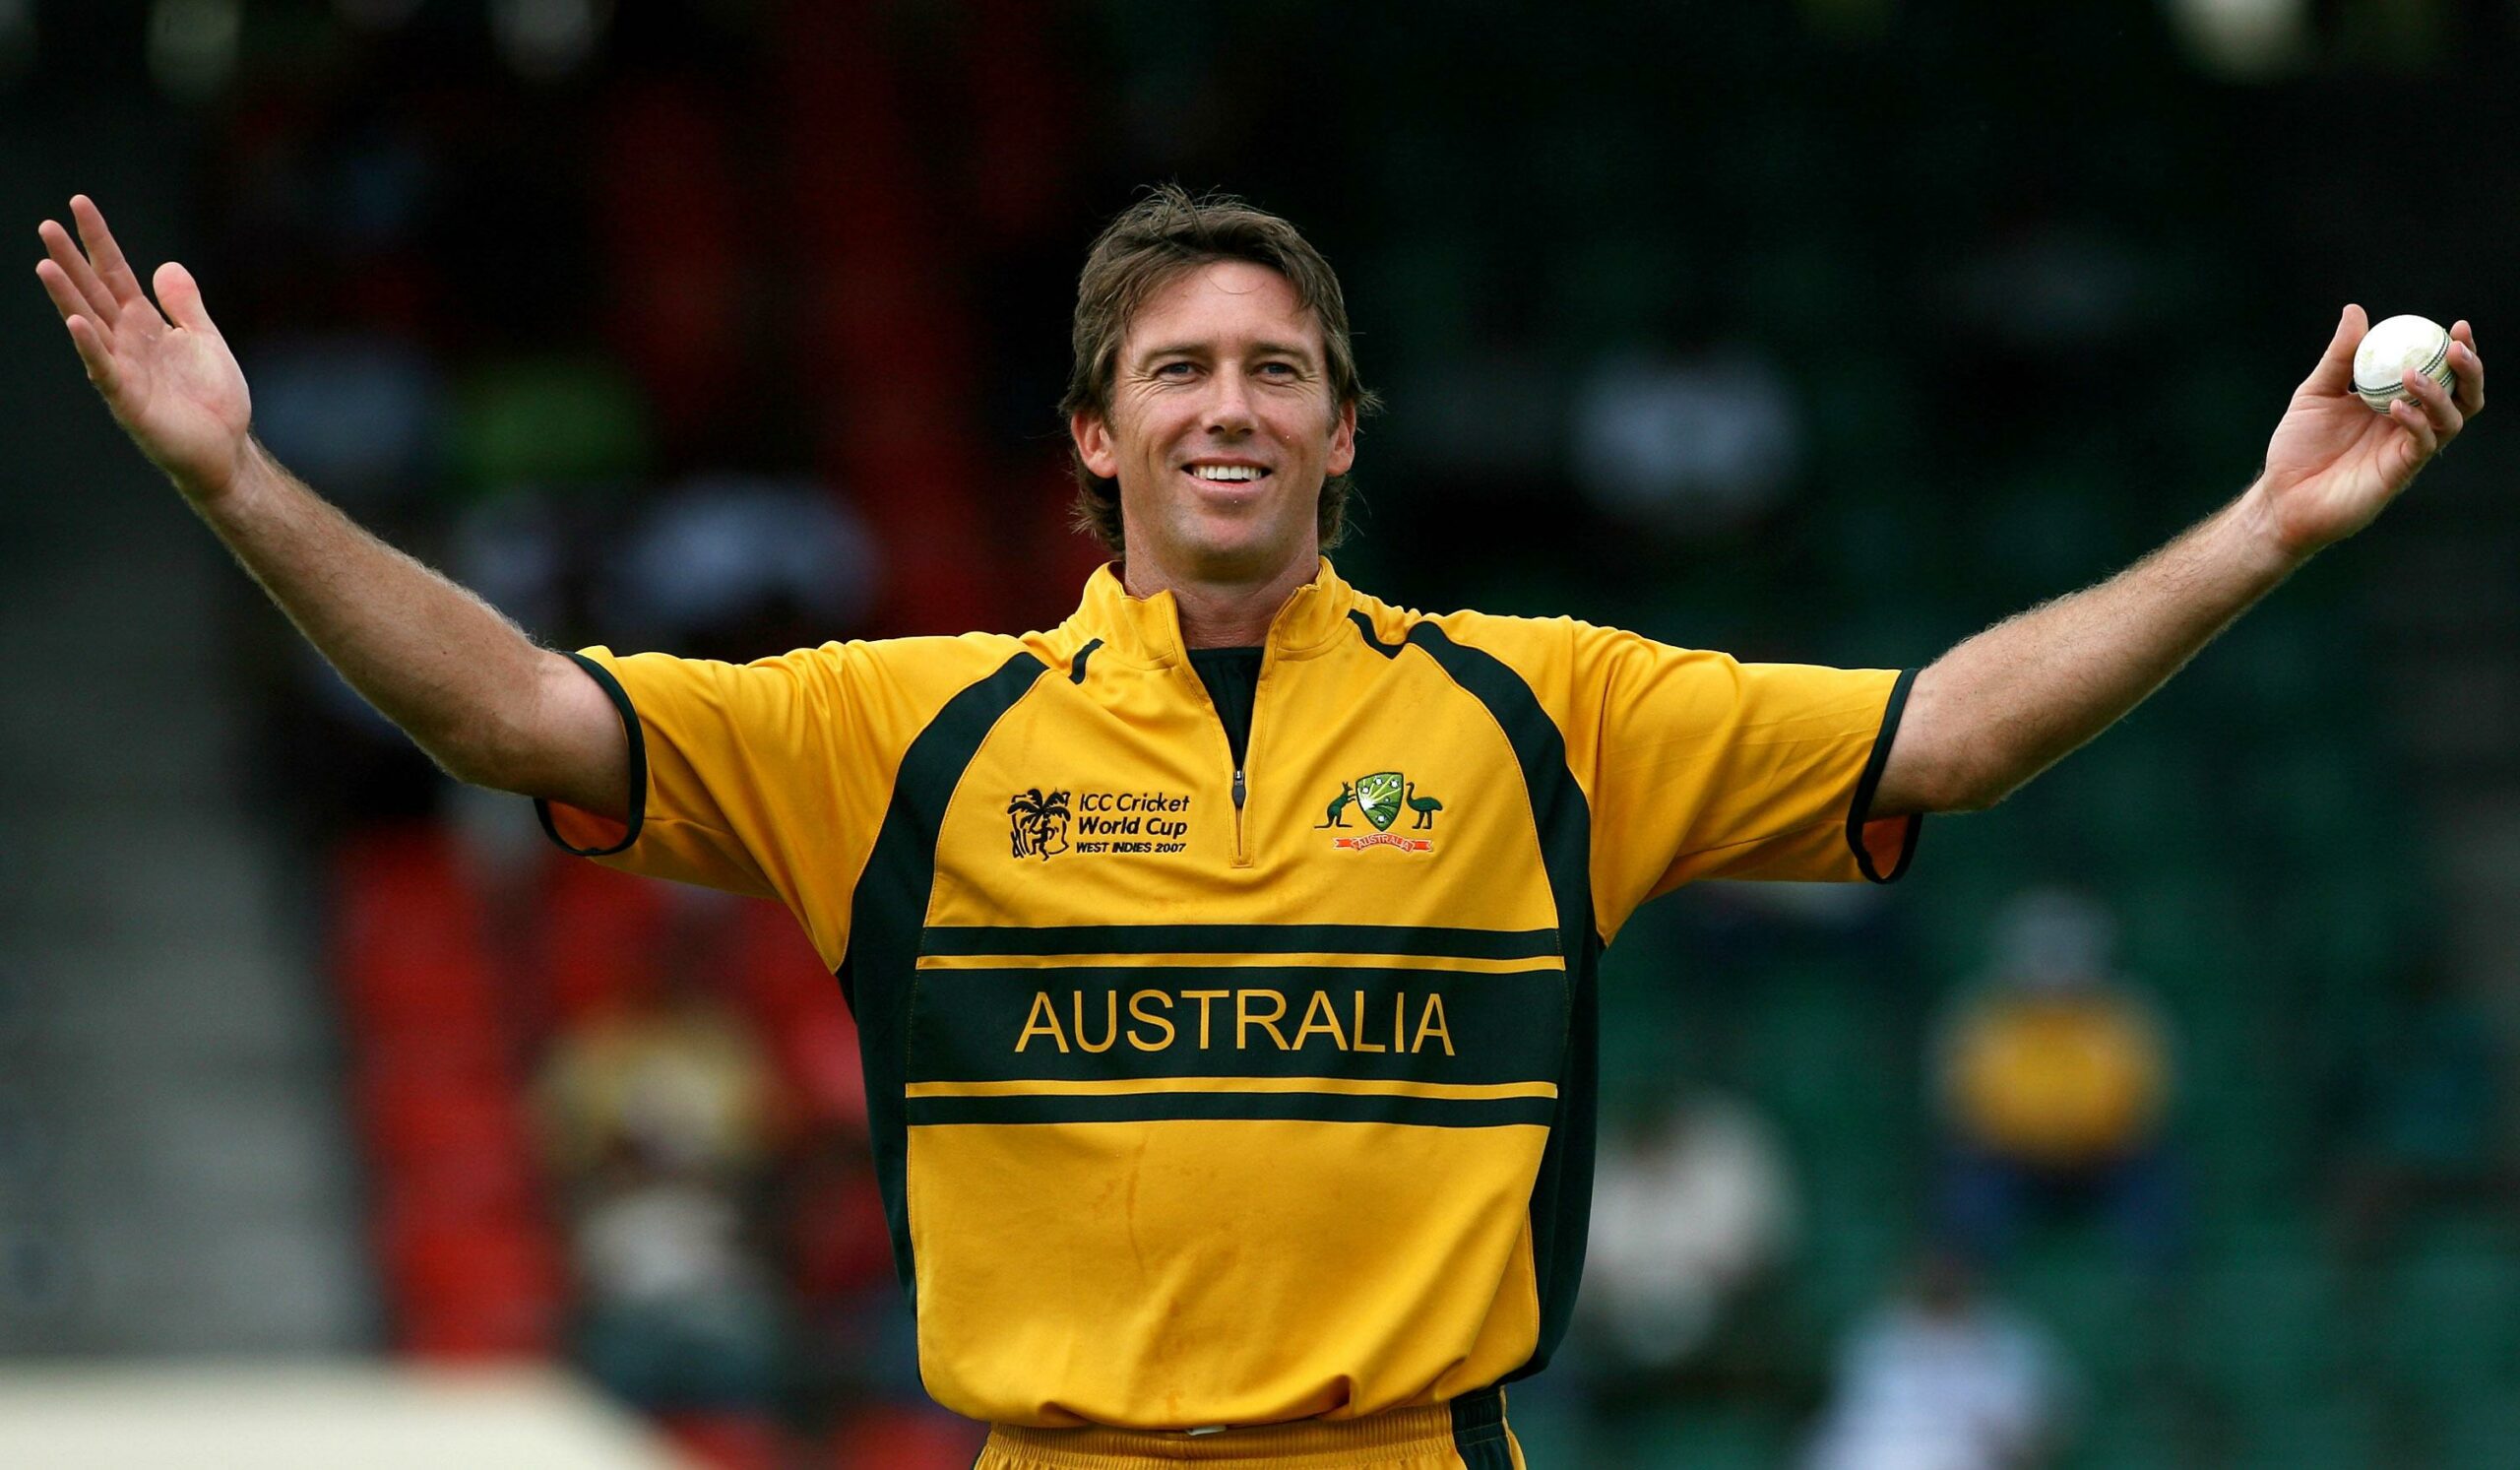 Glenn McGrath - Most Successful Australian Cricketers of All Time